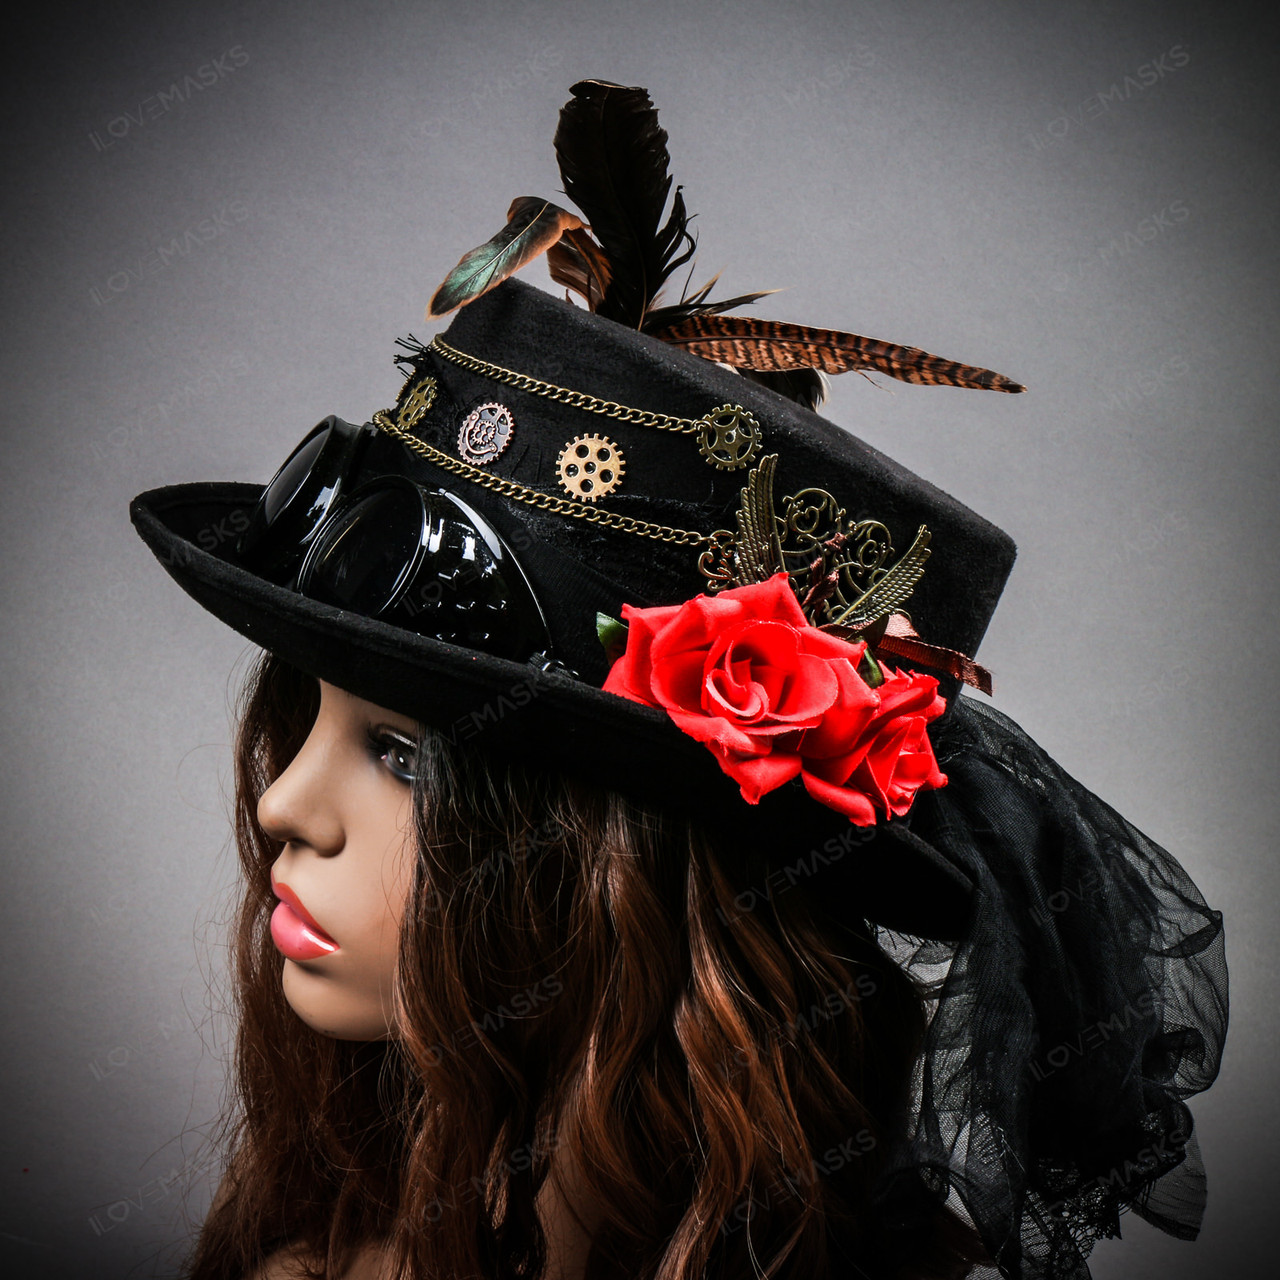 Women Steampunk Cosplay Goggles Victorian Top Hat with Lace - Black